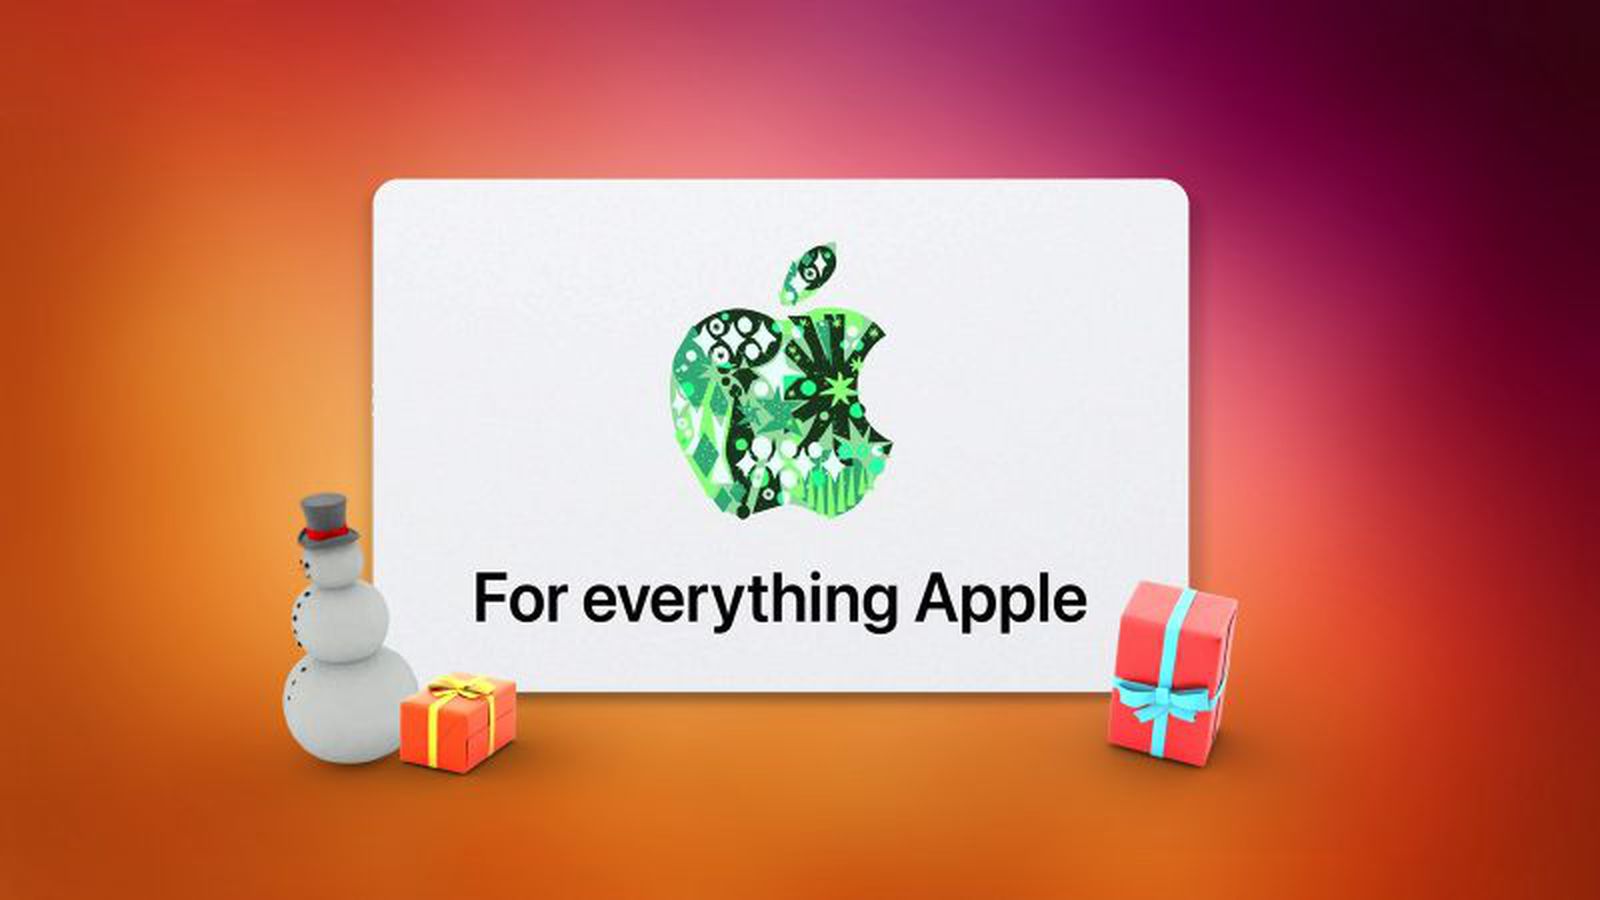 Card MacRumors - Buy Gift to Unwrapped What Apple You the With